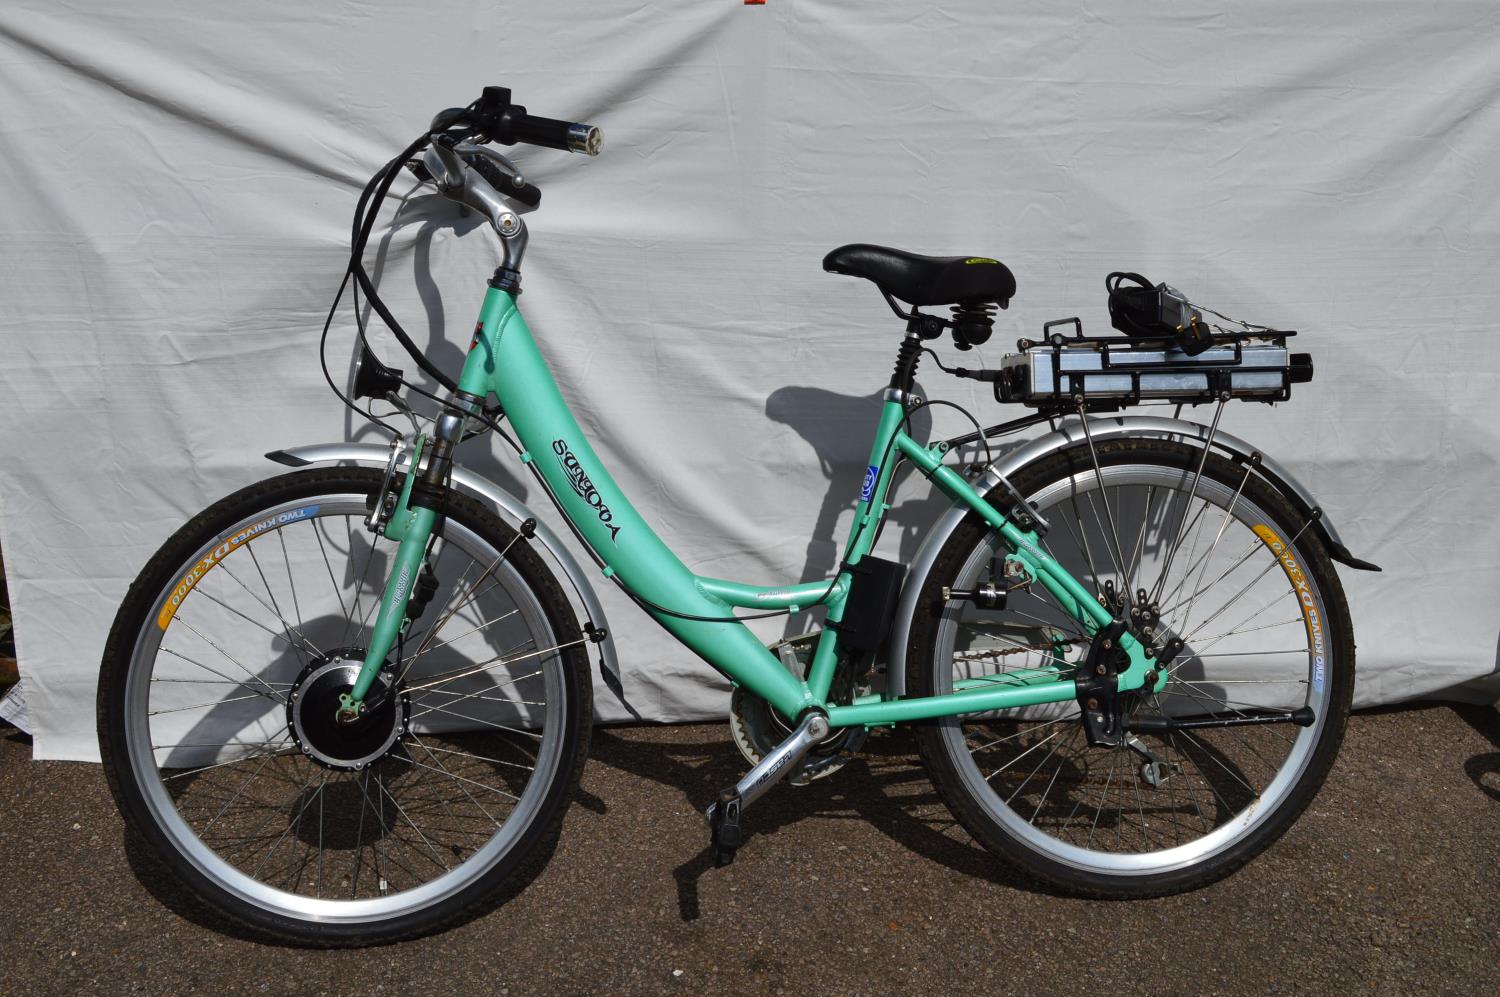 Ladies Sunlova electric push bike (sold as seen, untried and untested) Please note descriptions